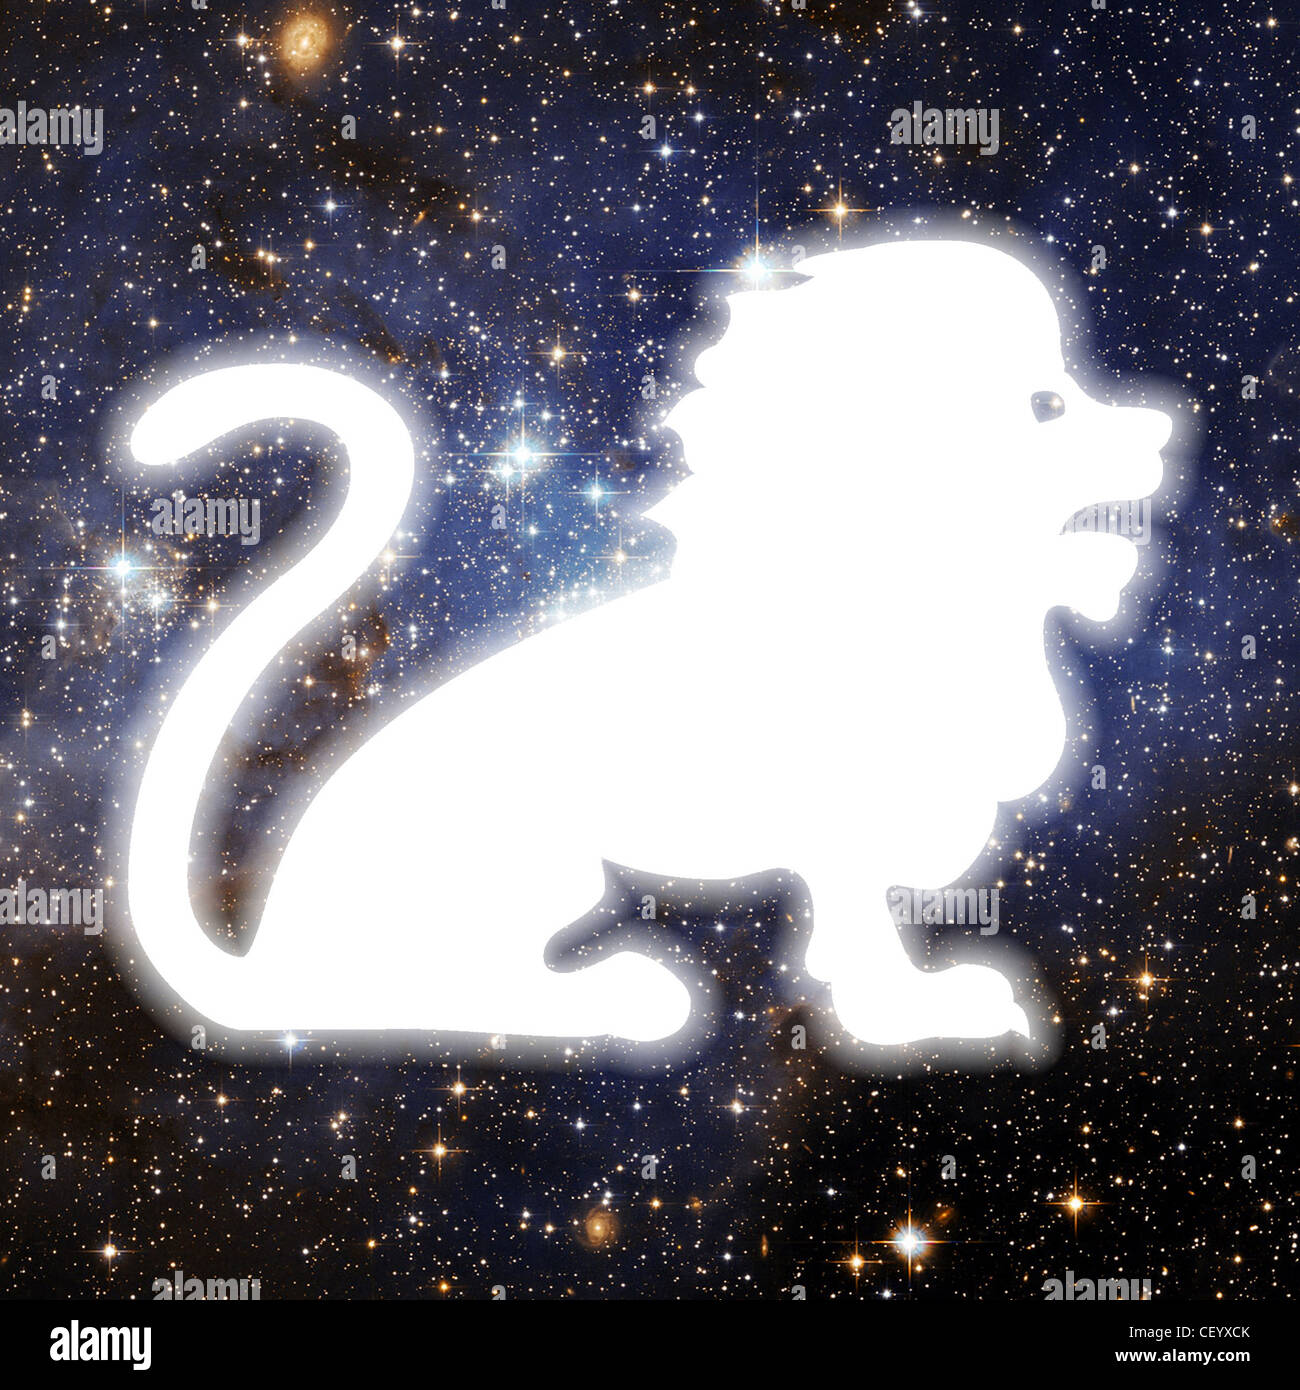 An illustration of a white silhouette of a lion, set against a background of space filled with stars Stock Photo